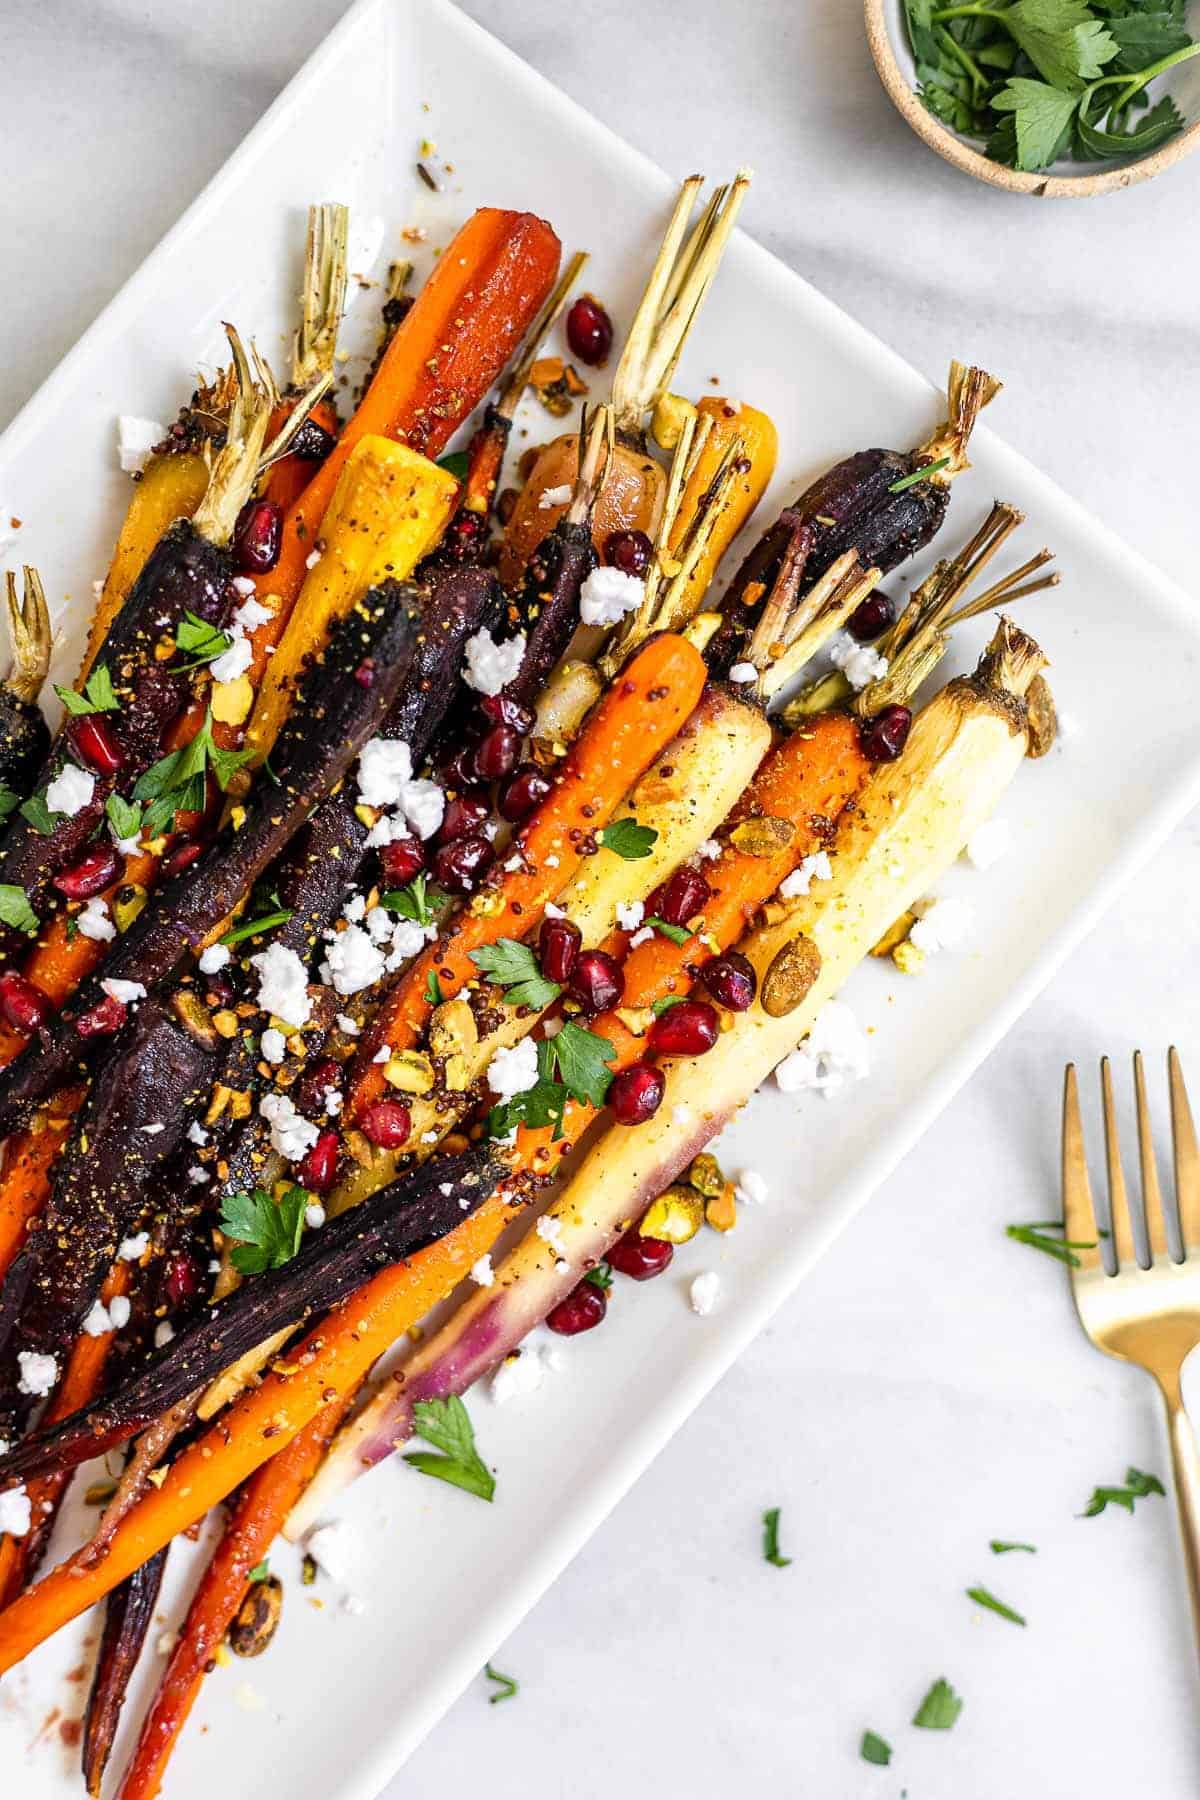 Final rainbow roasted maple glazed carrots with pistachios and feta.